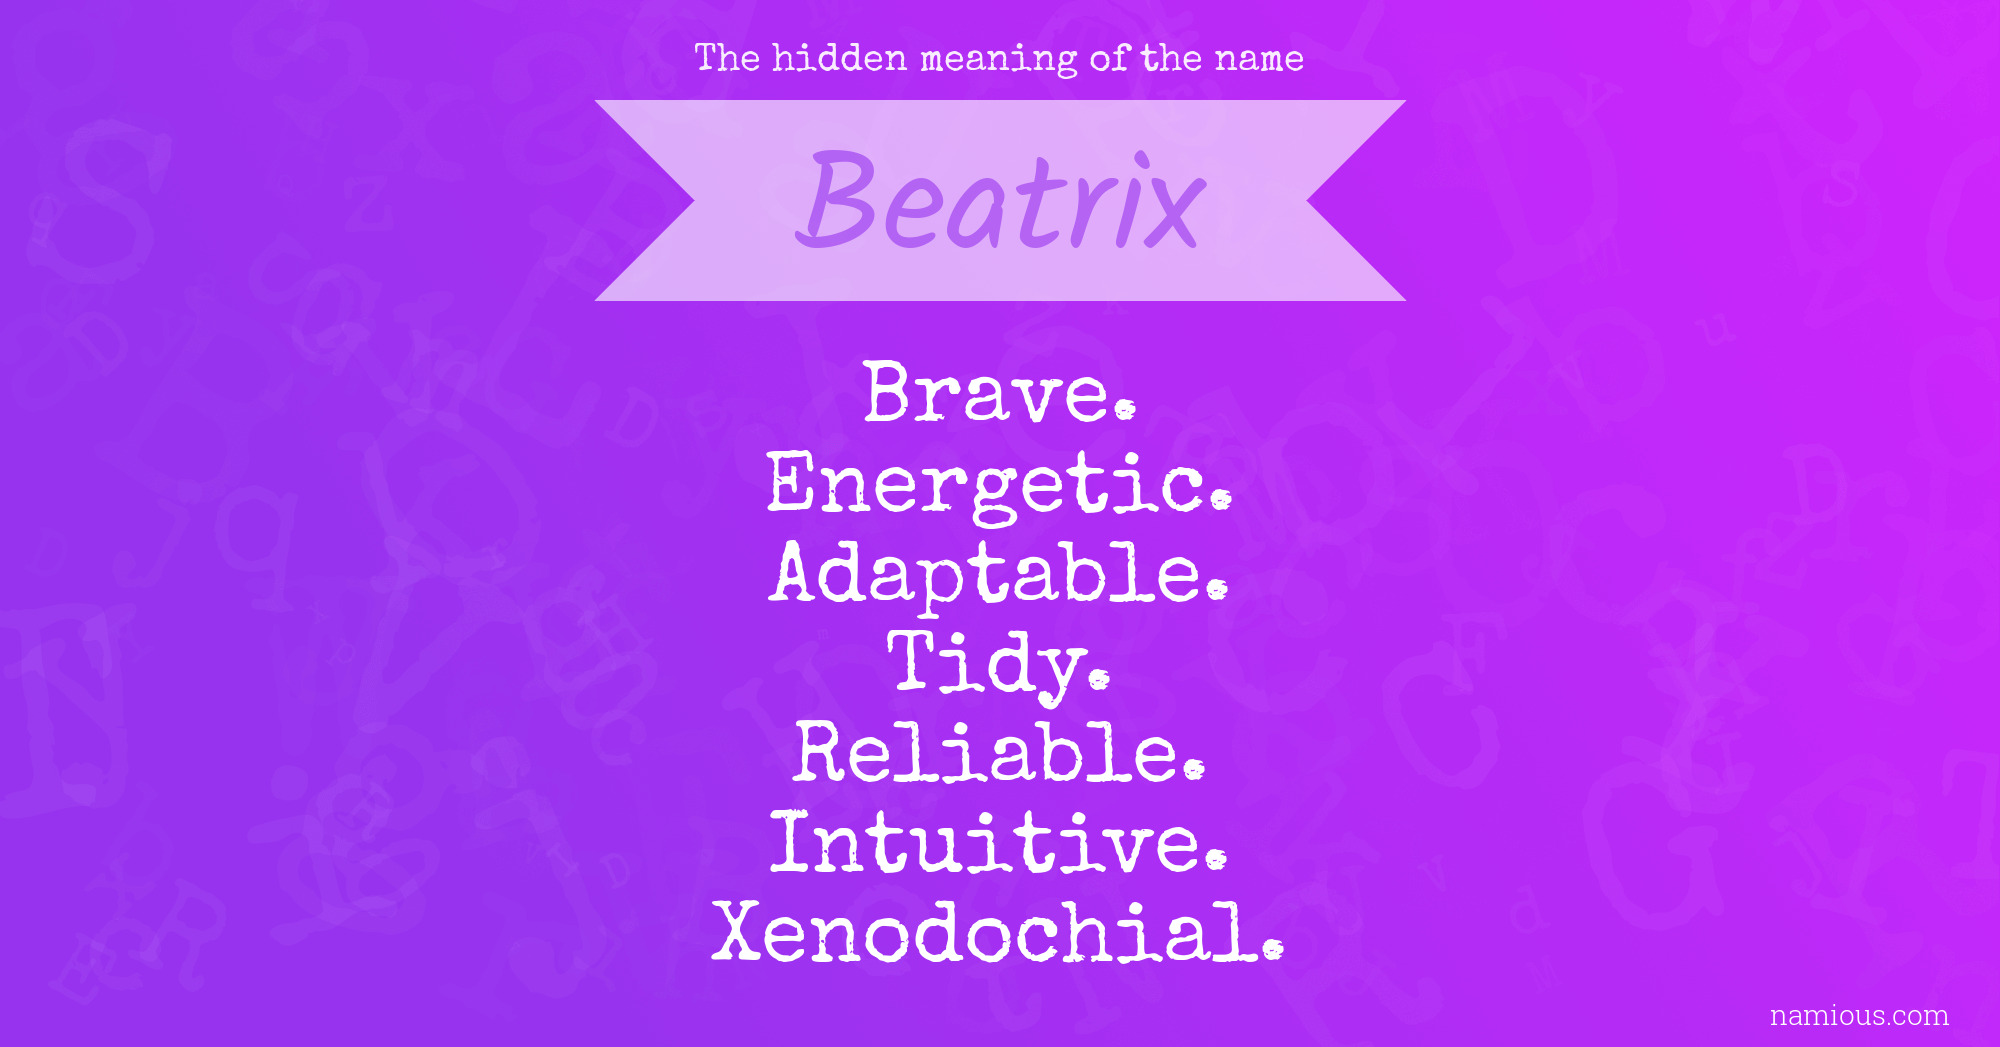 The hidden meaning of the name Beatrix